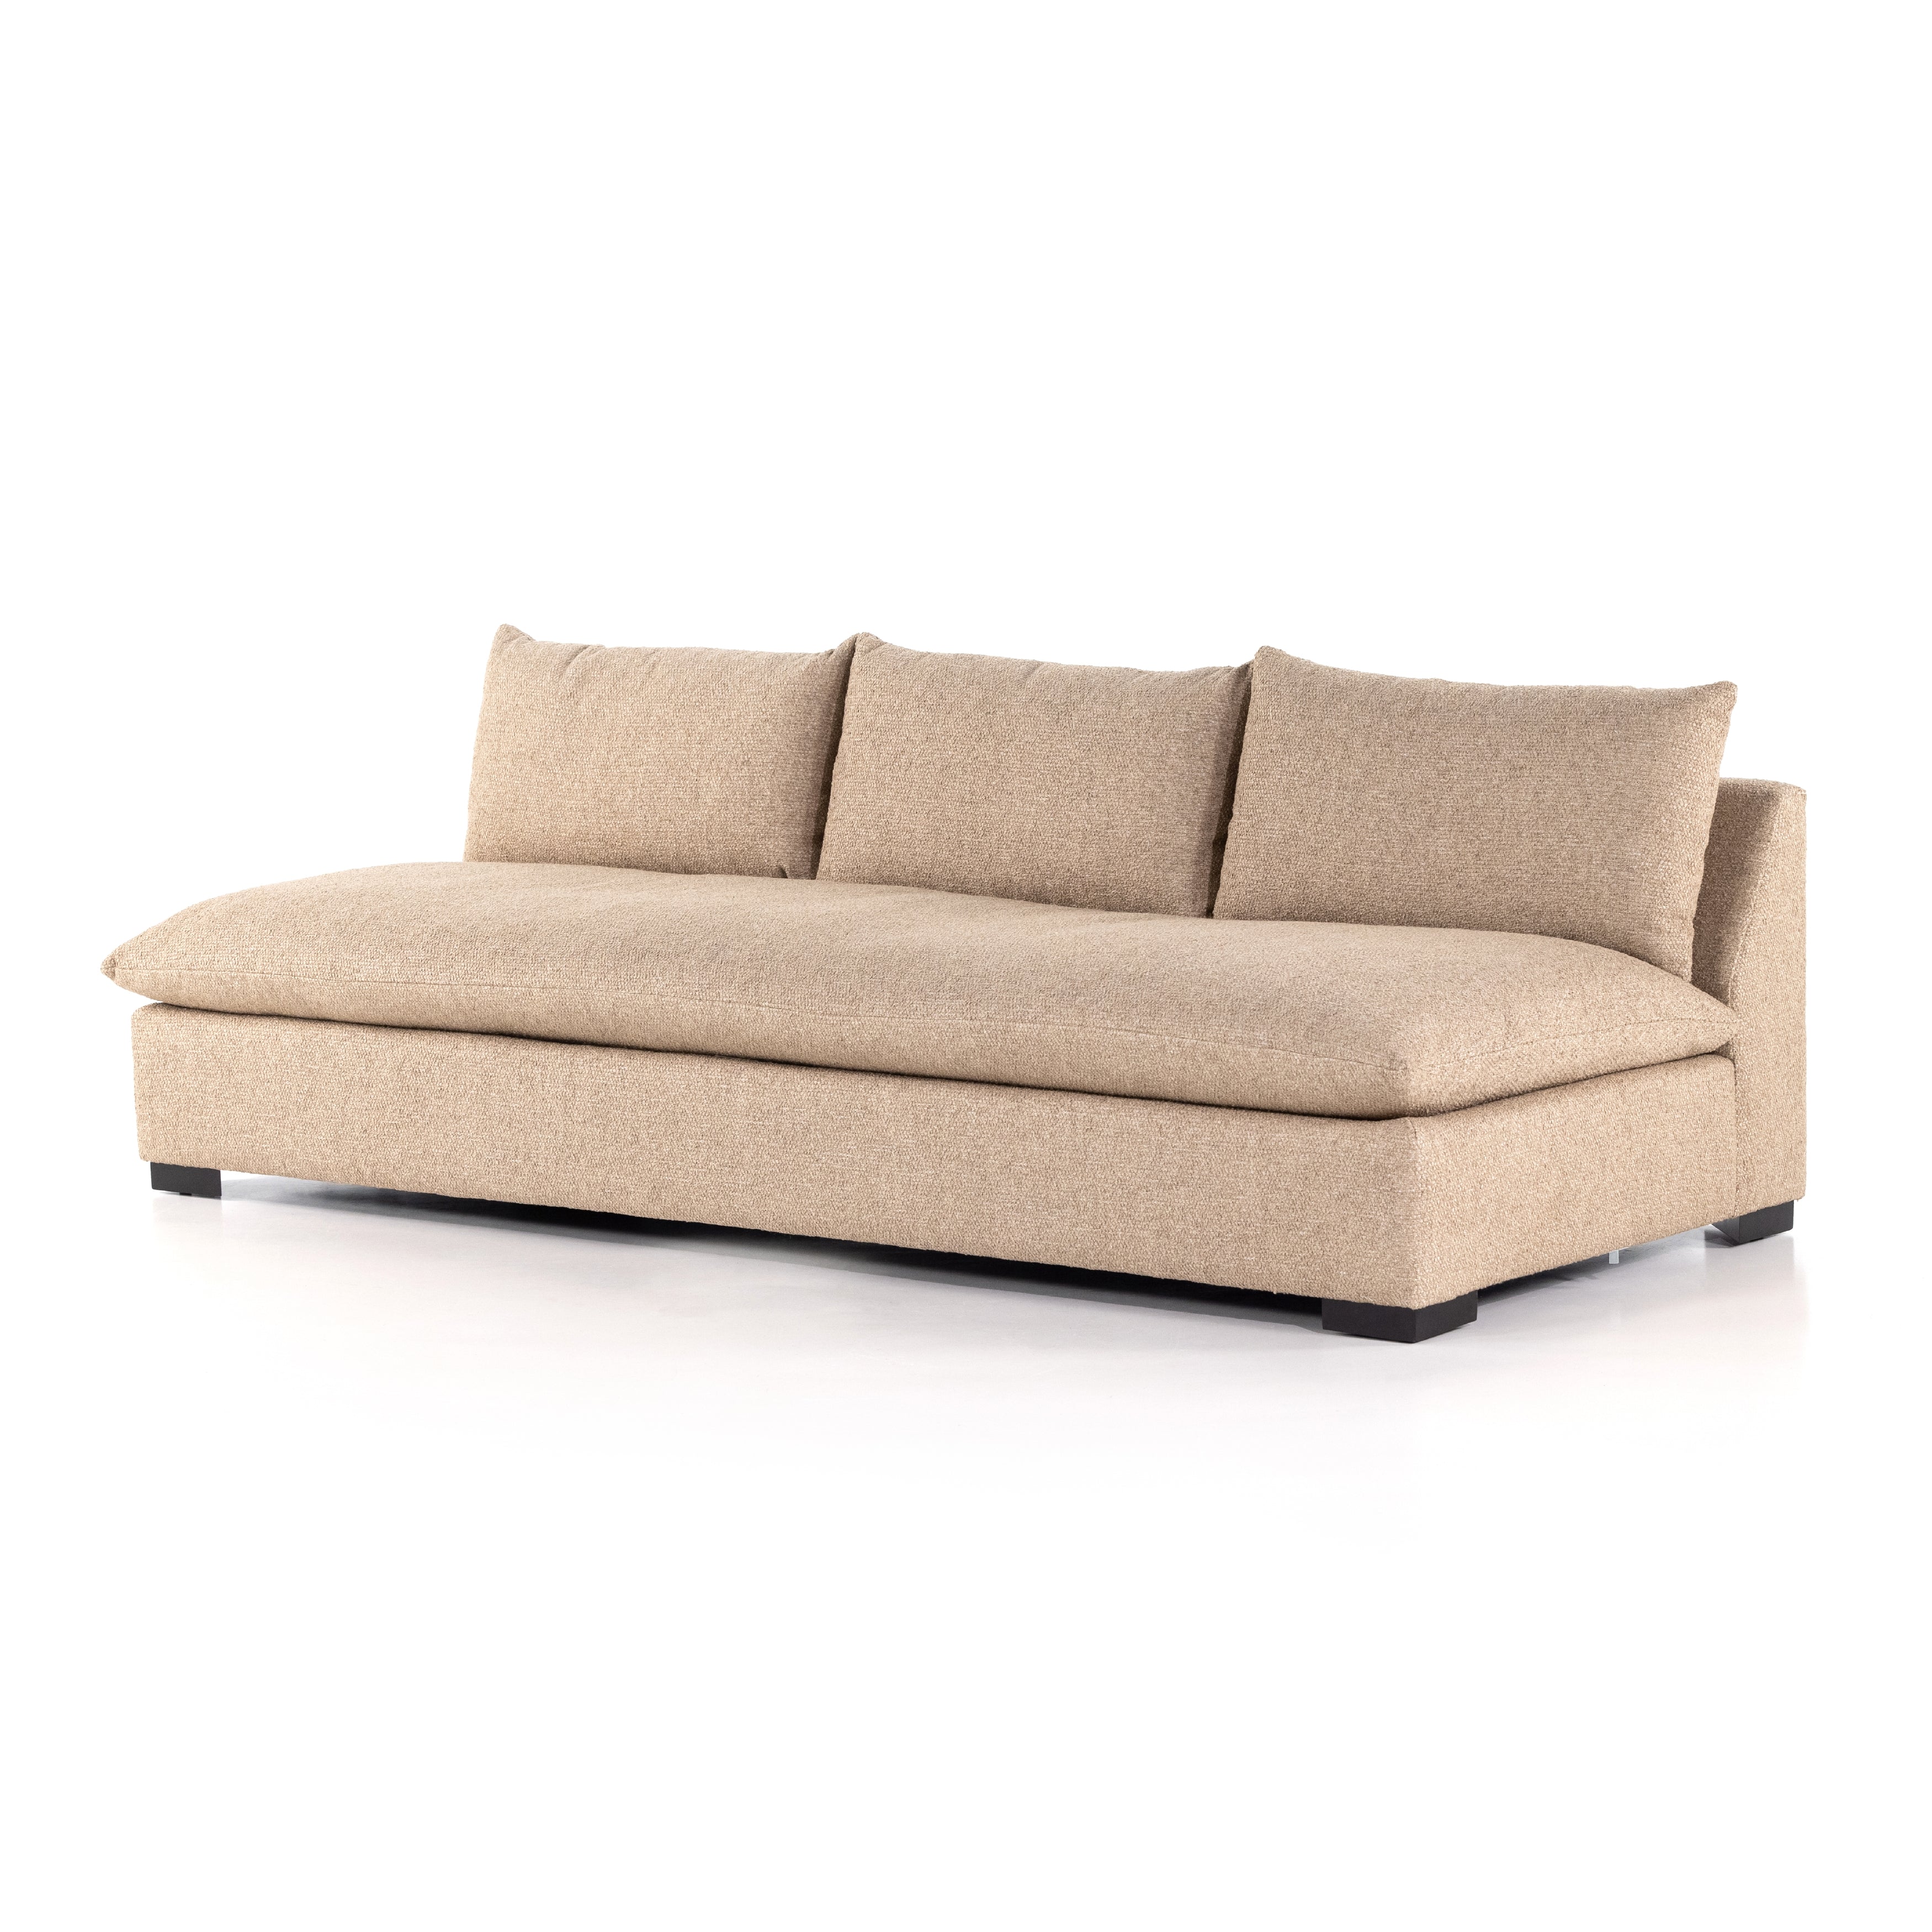 This Grant Armless Sofa - Heron Sand is a new twist to an Amethyst Favorite! With Italian high-performance fabric, inviting, boucle-like texture takes this modern lounging essential to the next level. Armless sofa to matching sectional.  Overall Dimensions: 94.00"w x 40.00"d x 31.50"h